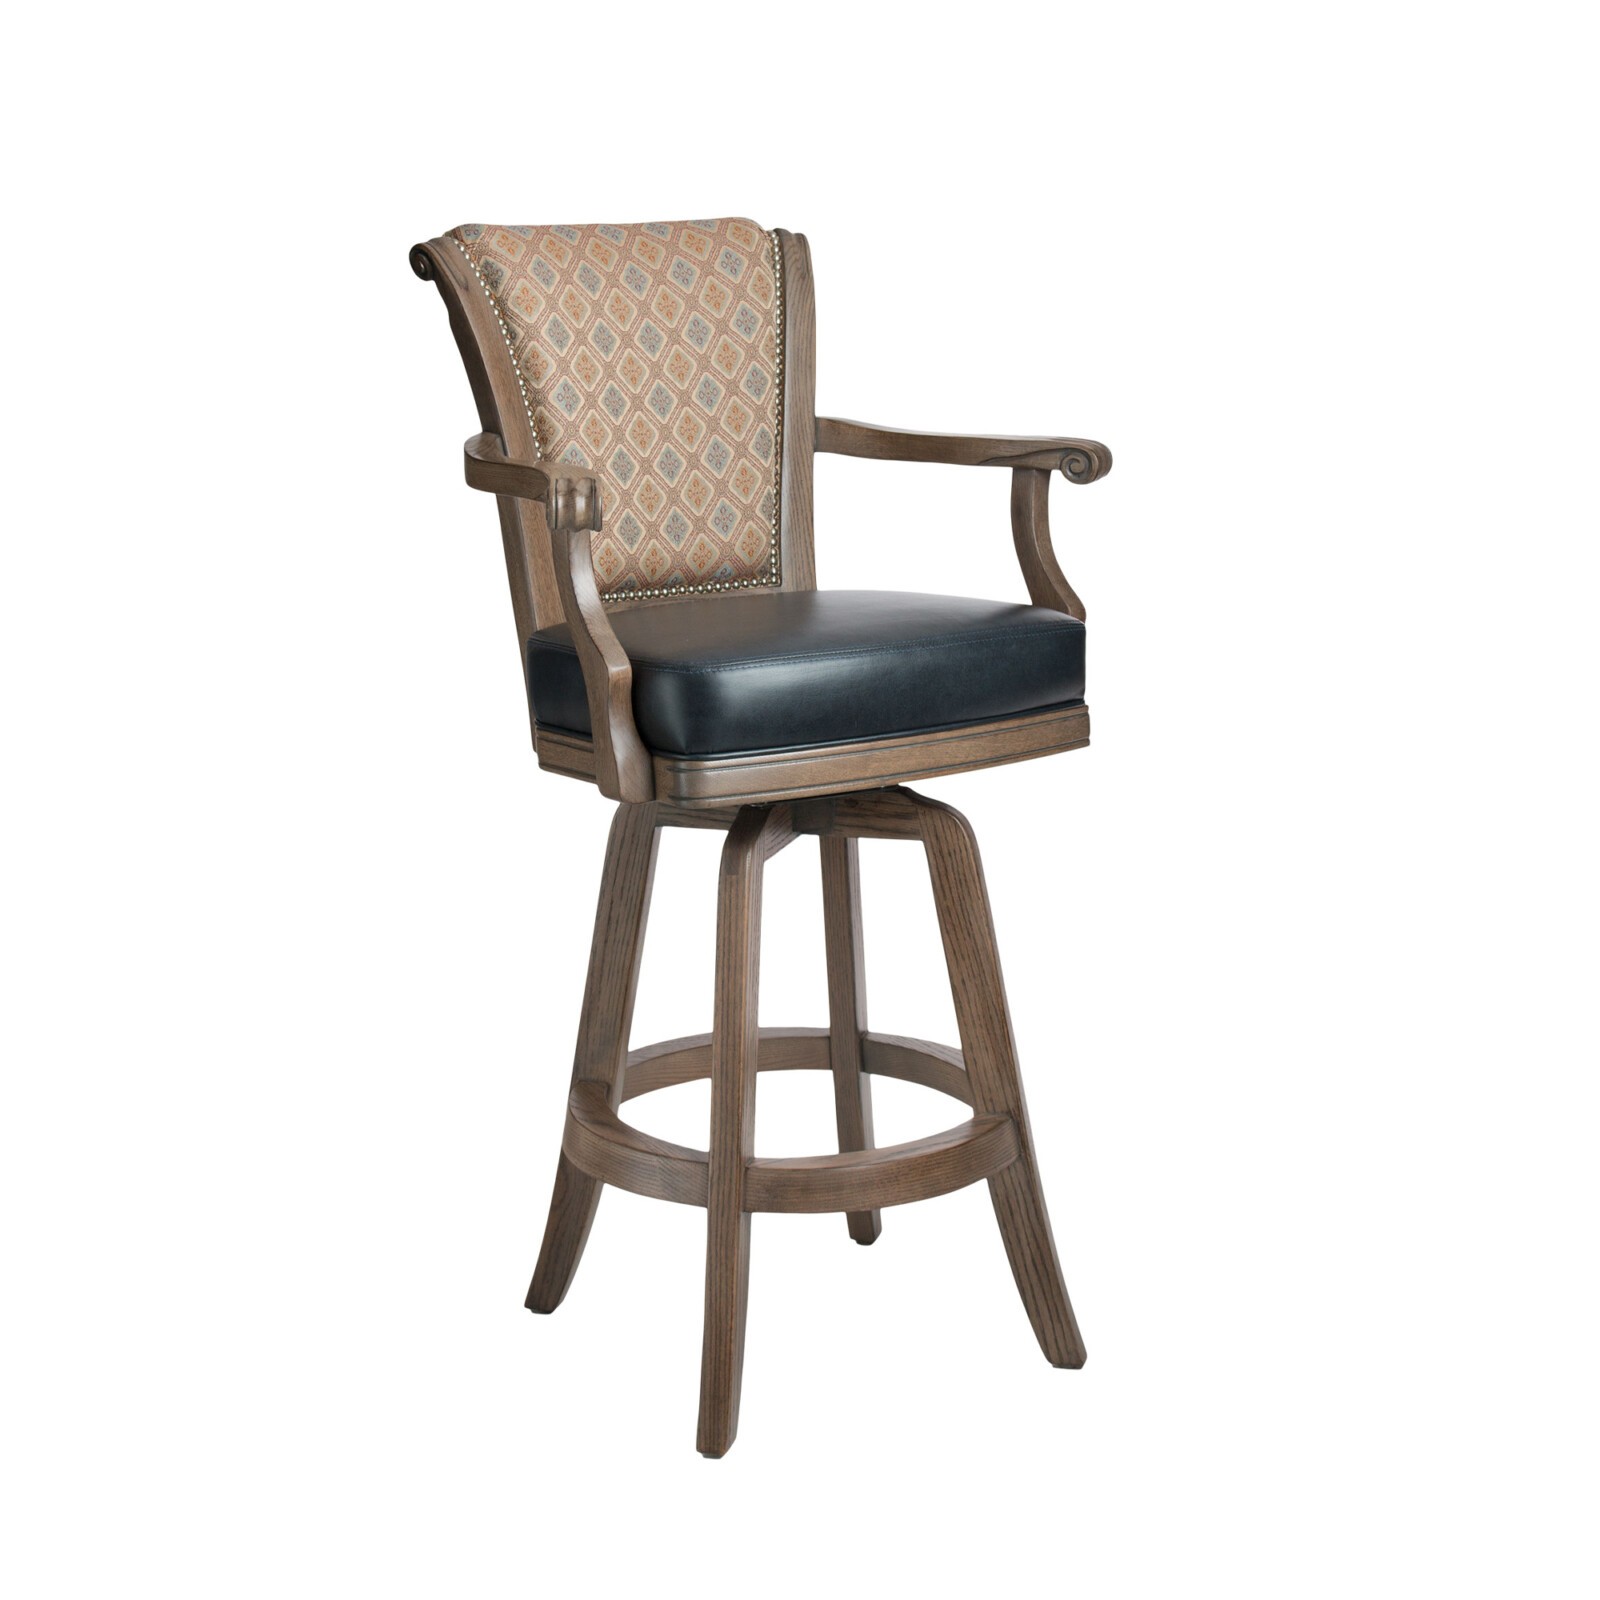 Shown In: Back Covering : Shelby Mocha Seat Covering Guanaco West Leather: • Oak Wood Finish: Rustic Pewter • Footplate Finish: Antique Brass Nail Head: Hammered Antique Brass